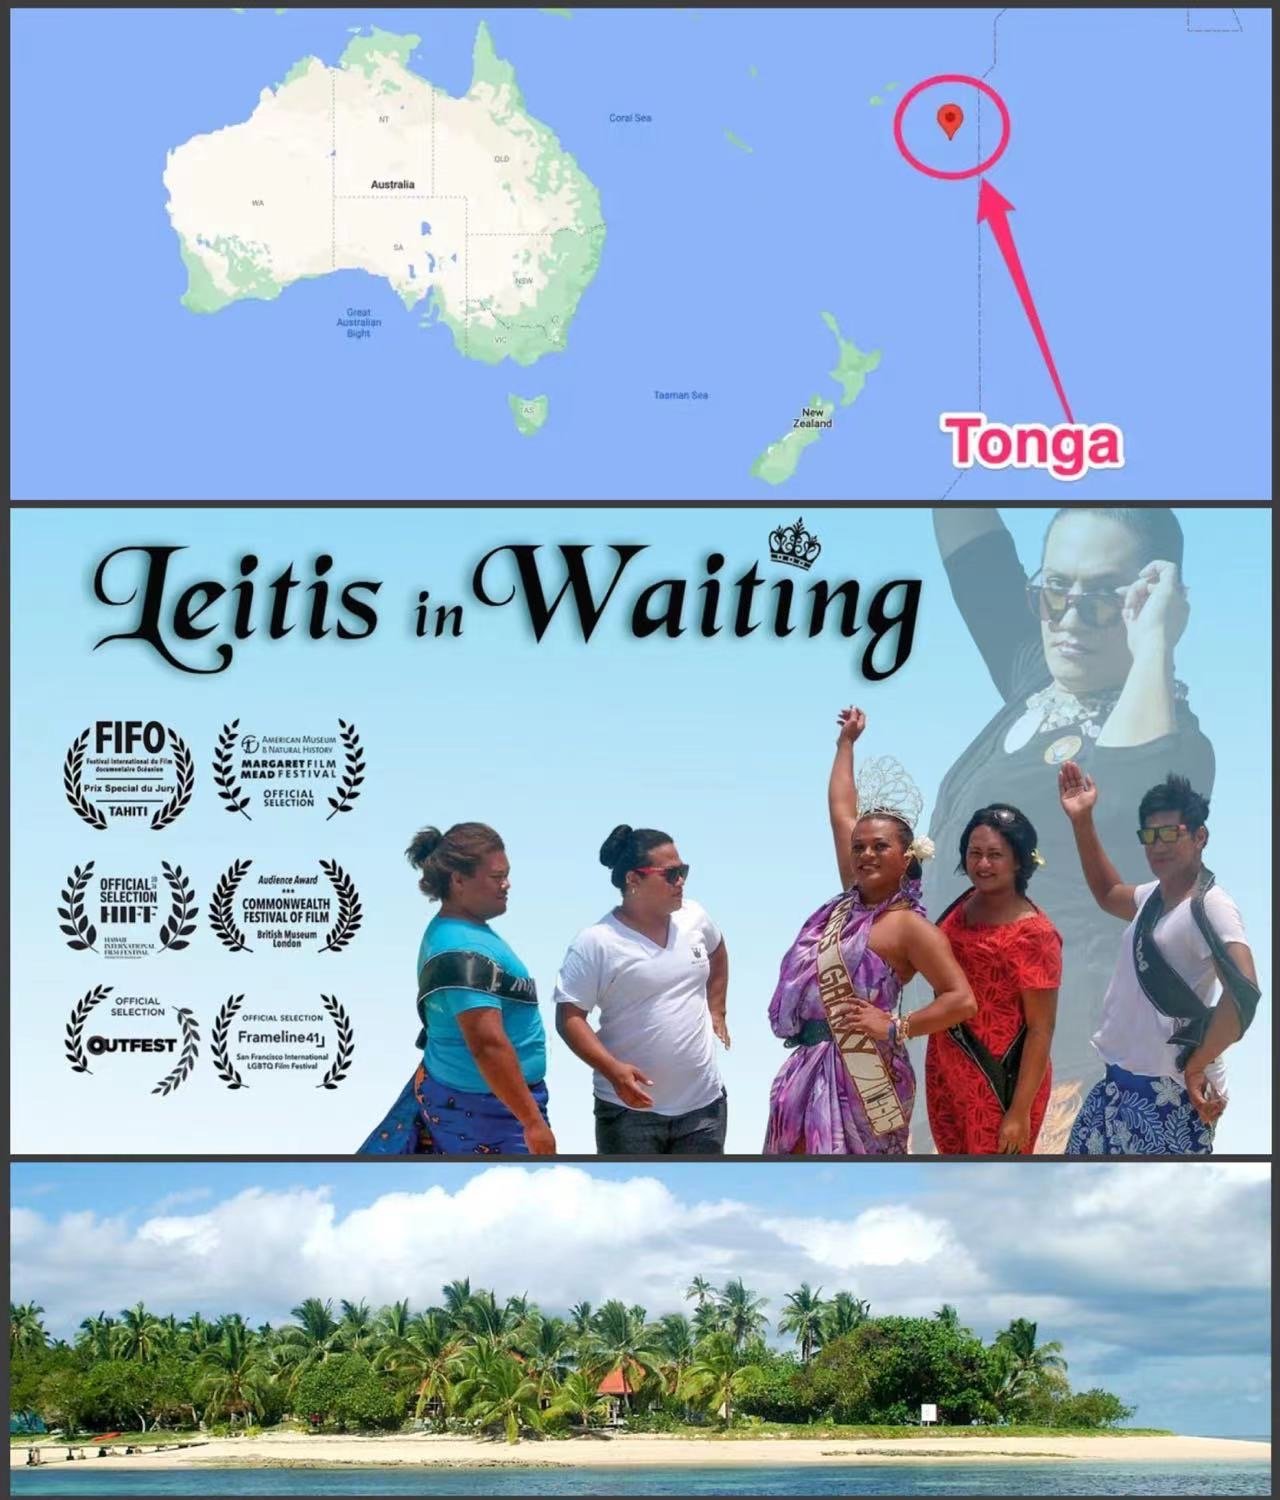 Xie Xiao: One of the films shown in recent years at the Shanghai Queer Film Festival was ‘Leitis in Waiting’, featuring the trans community on the Pacific island of Tonga.